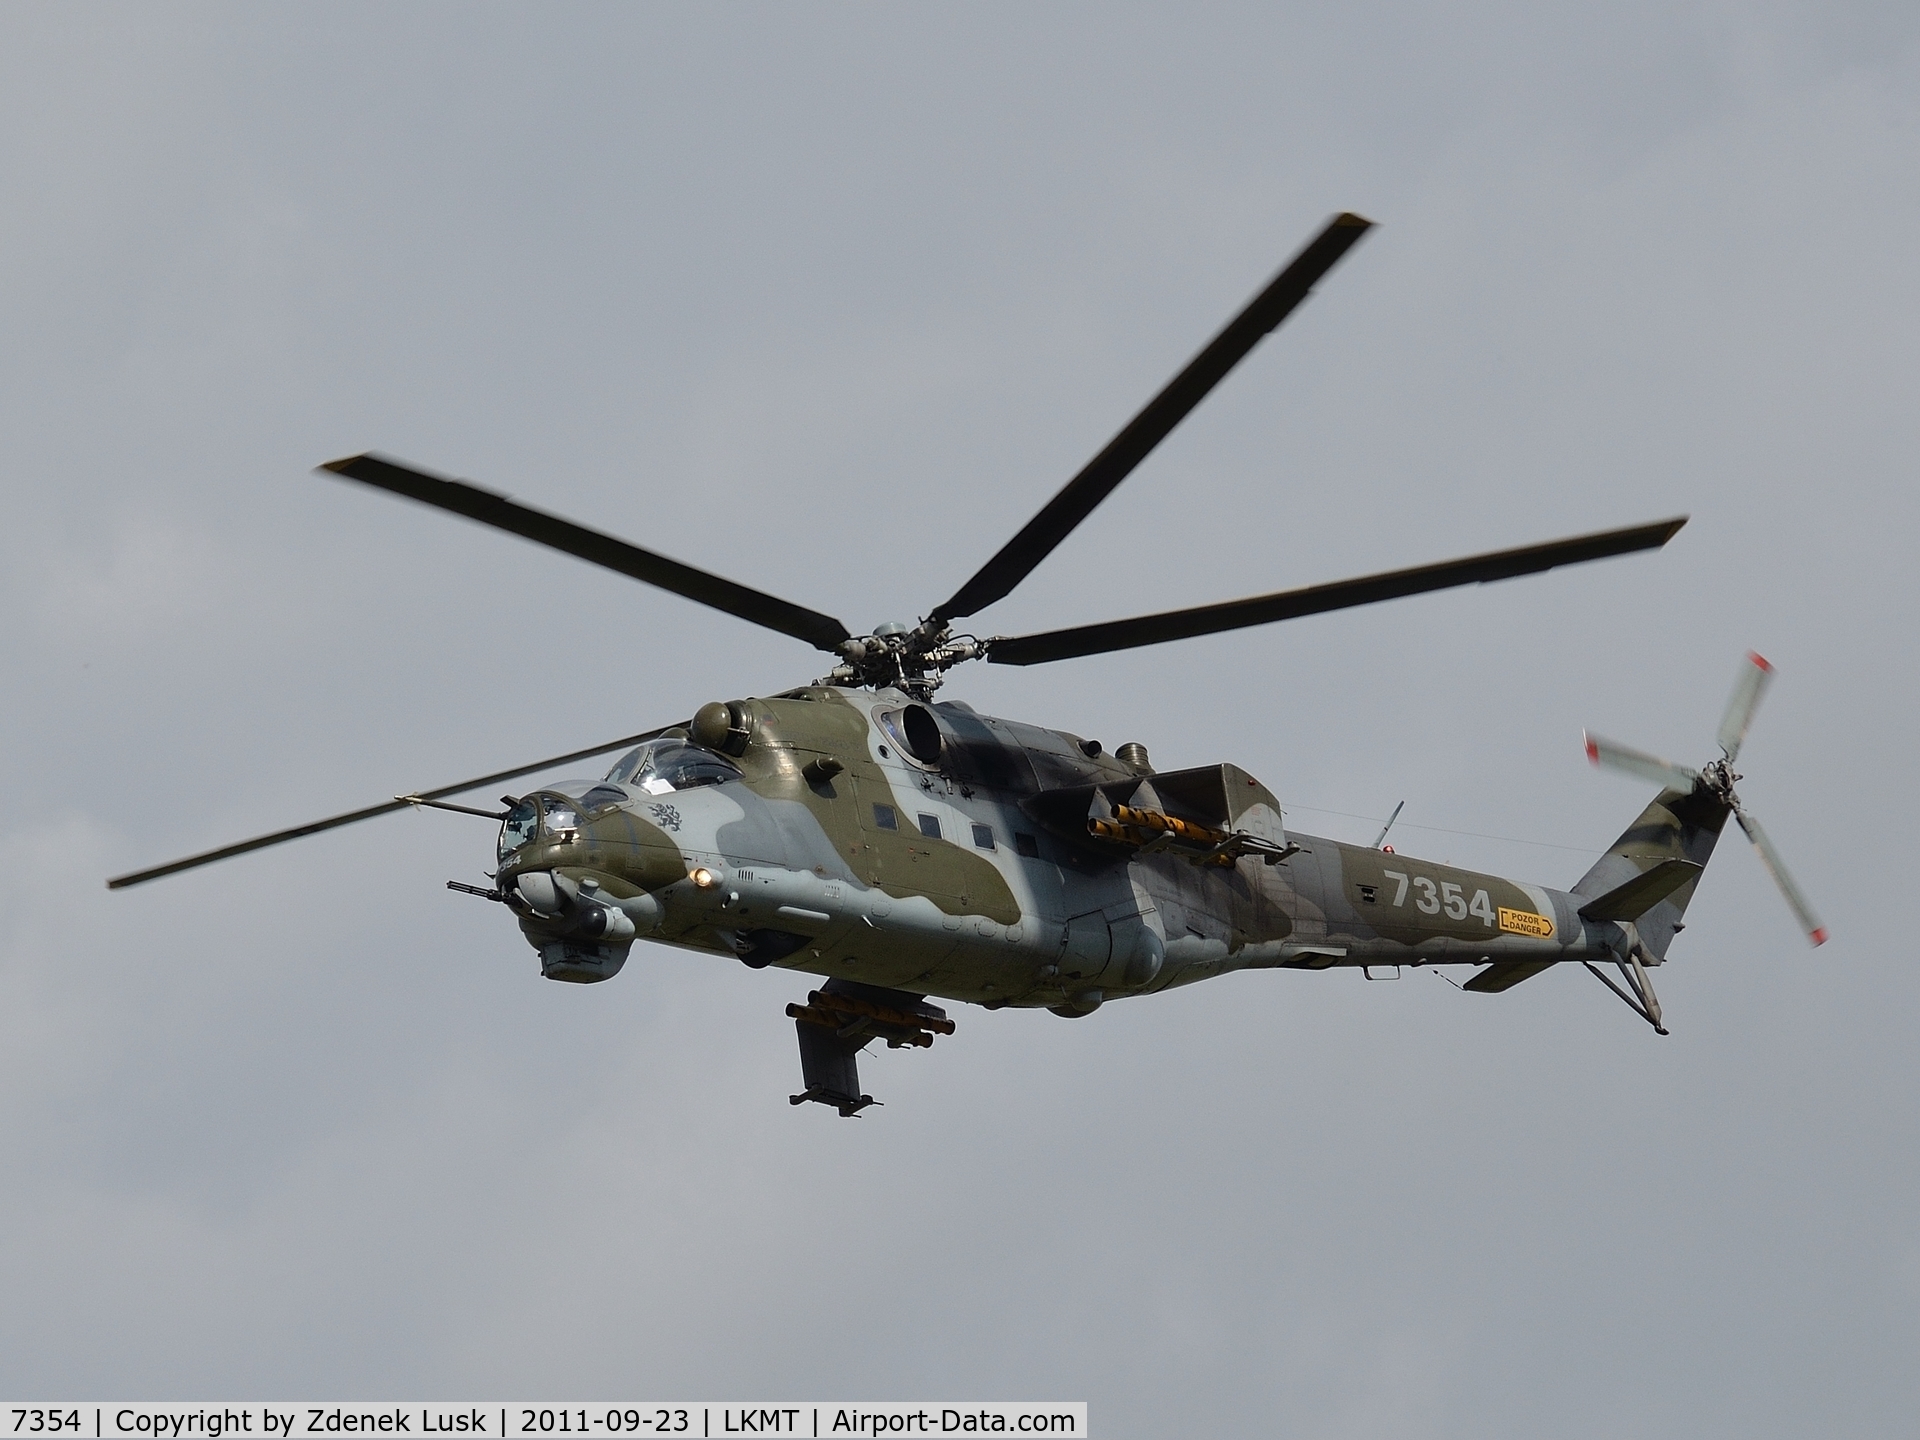 7354, Mil Mi-24V Hind E C/N 087354, Arrival to Days of NATO 2011 event.